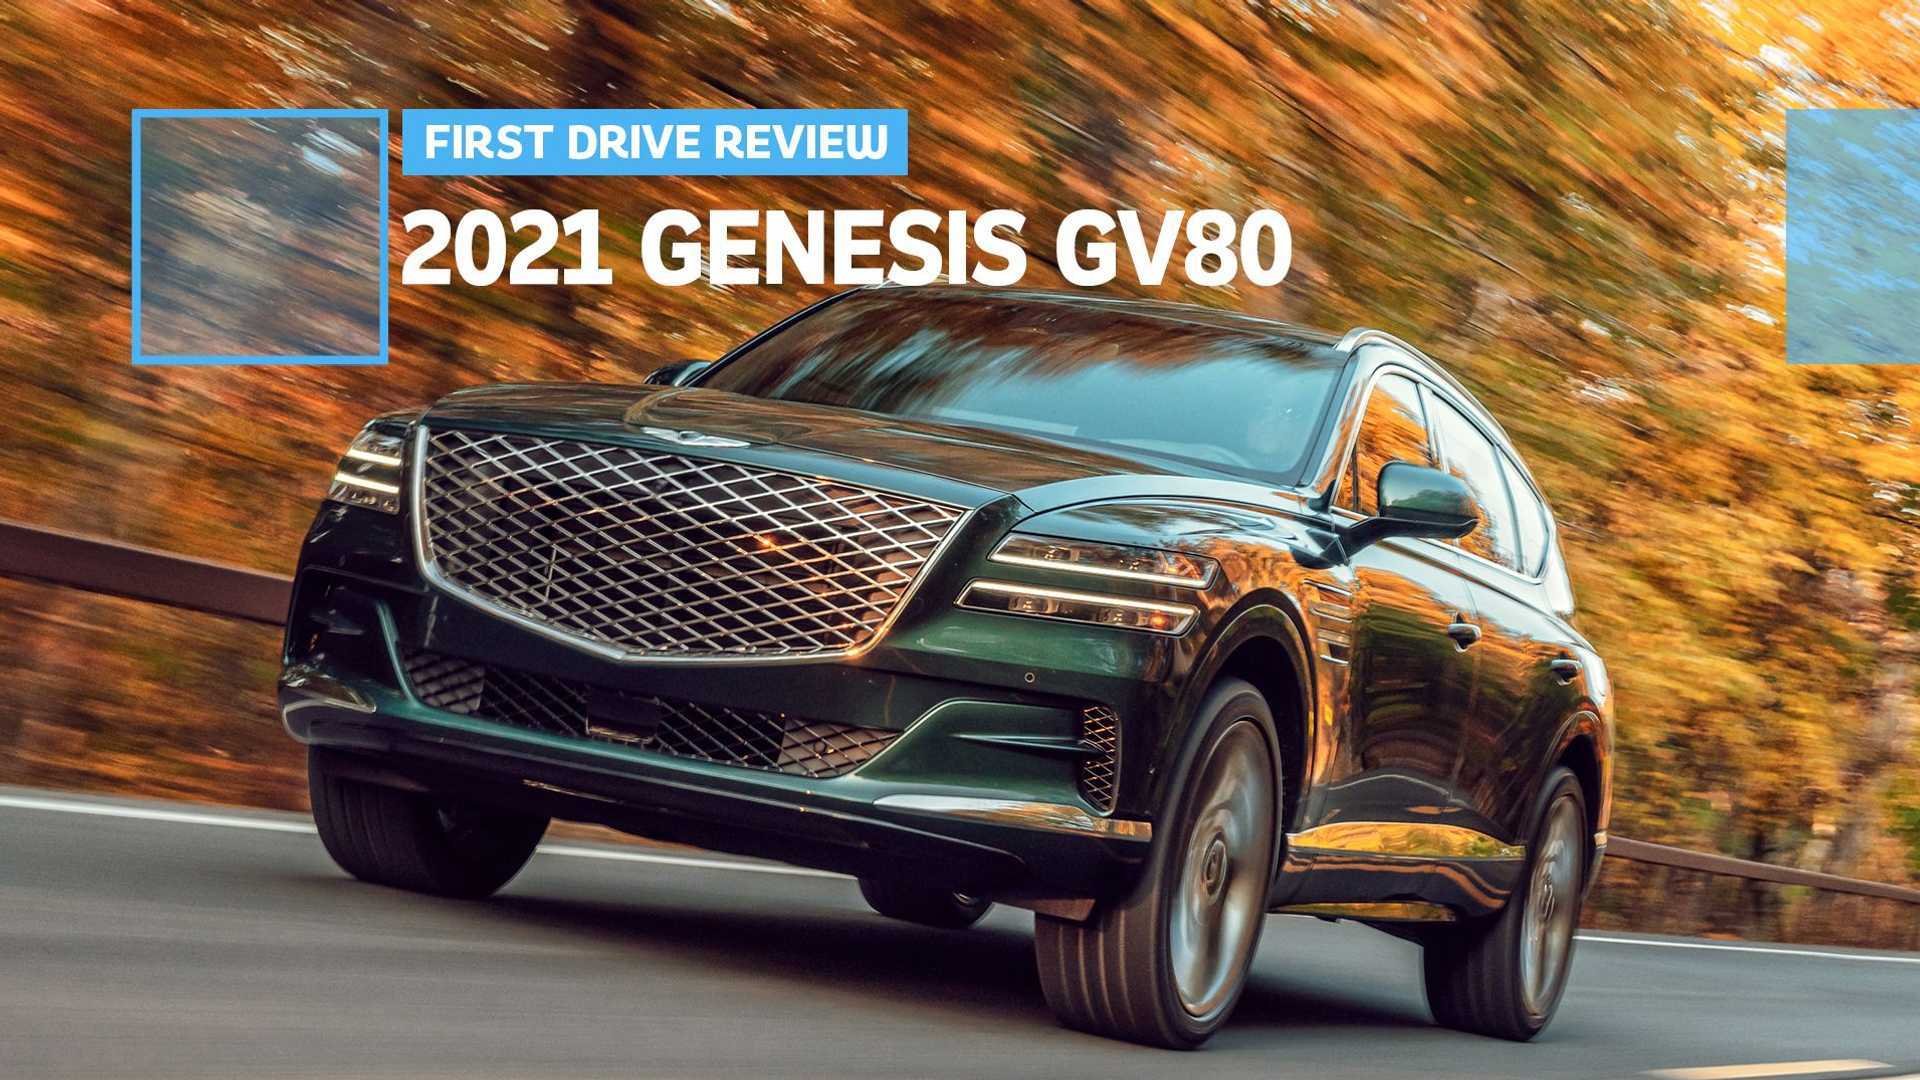 2021 Genesis GV80 First Drive Review: The Real Beginning